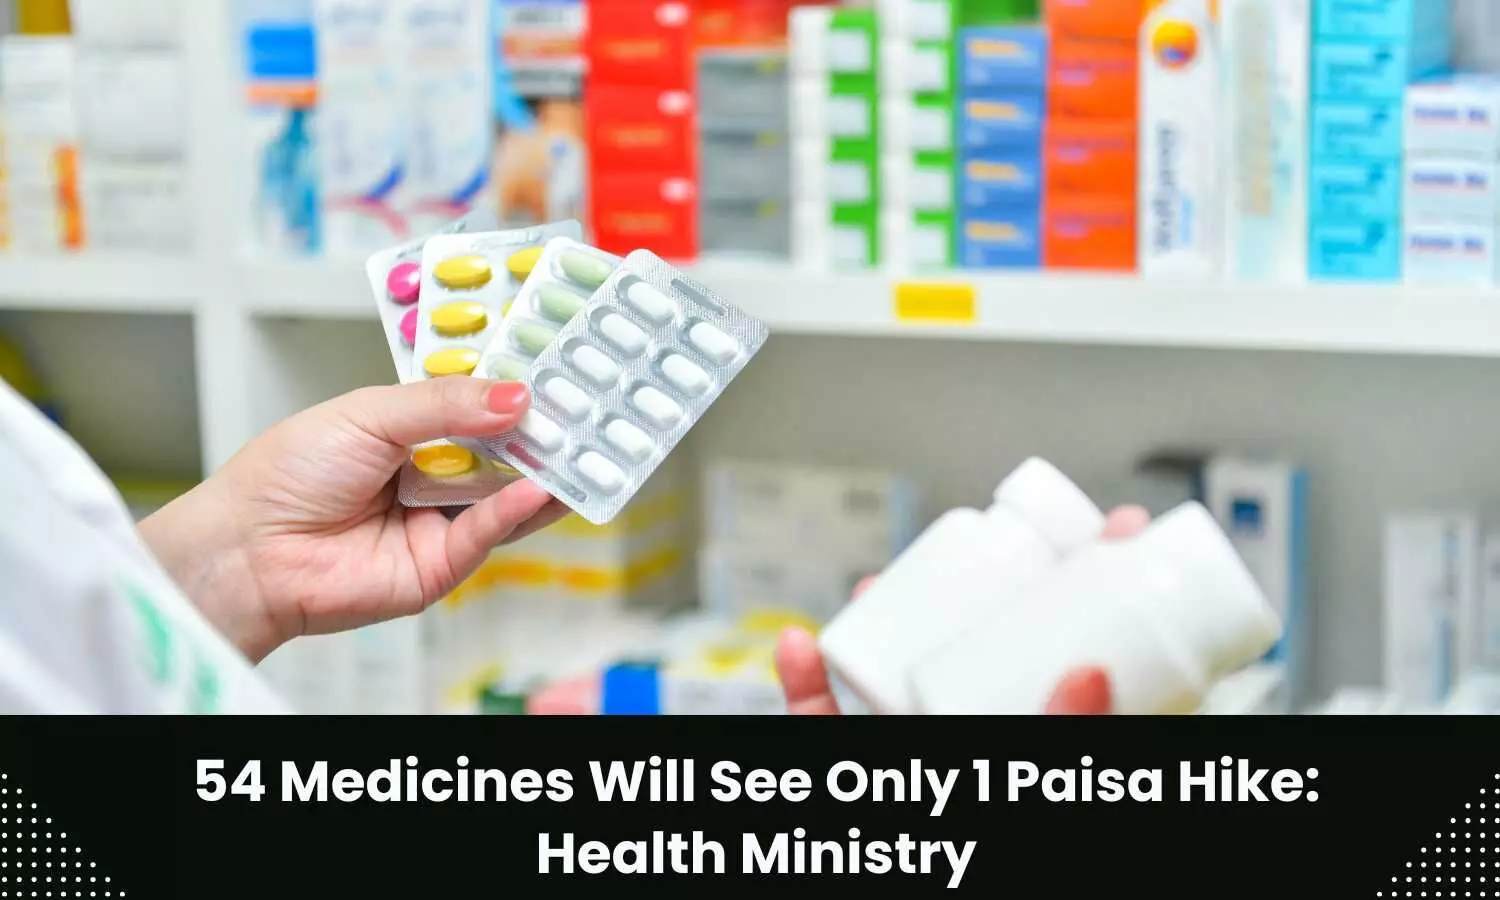 54 medicines will see only 1 Paisa hike, clarifies Health Ministry